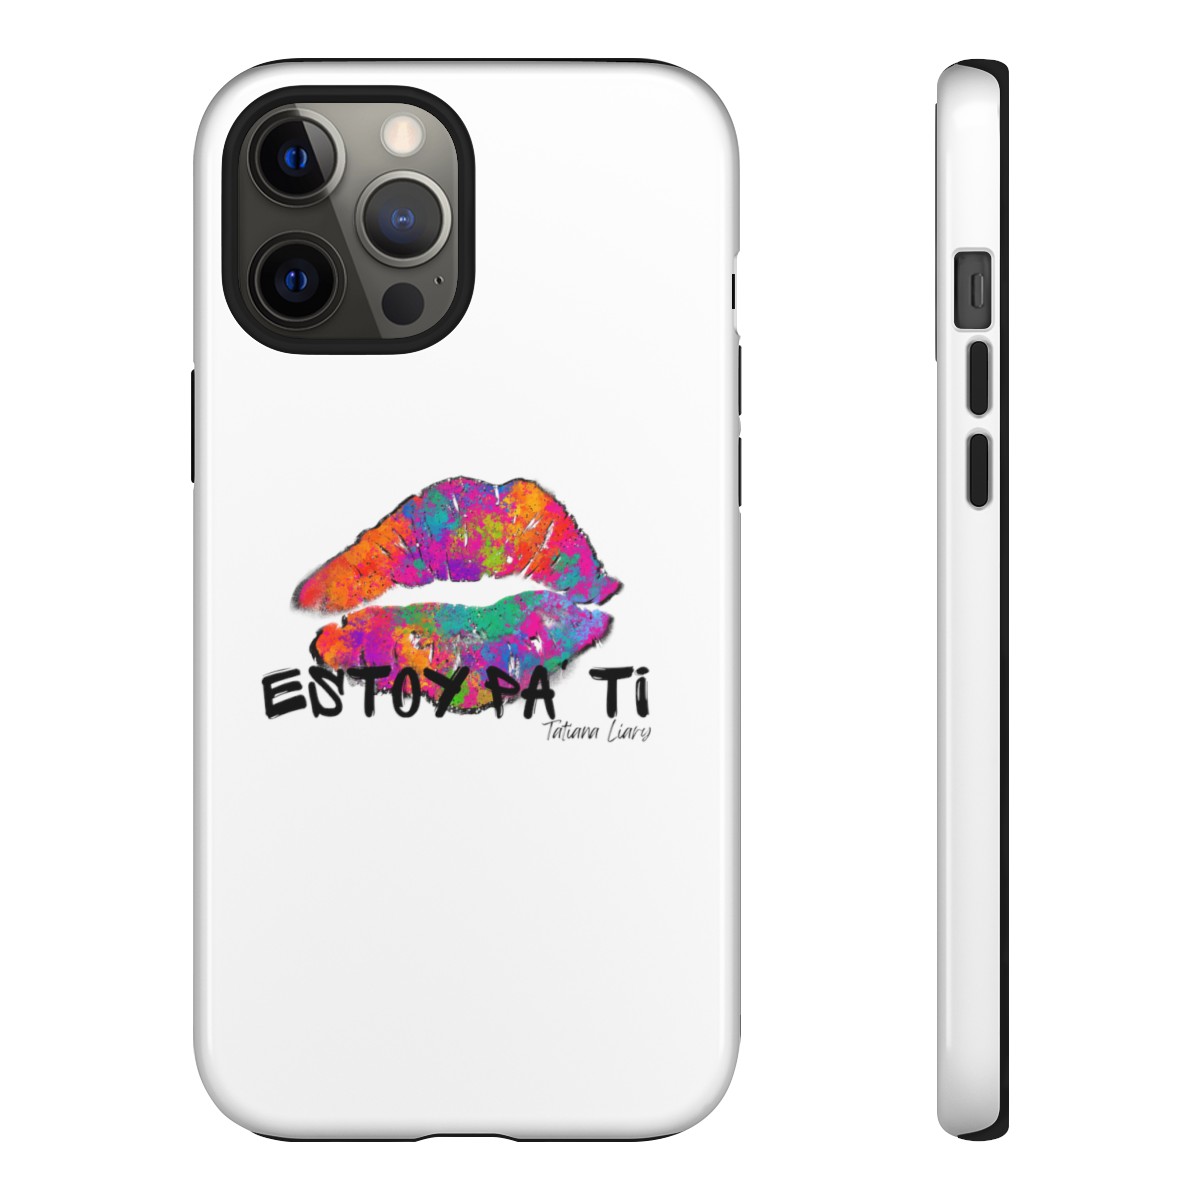 Estoy Pa' Ti Phone Cases product main image